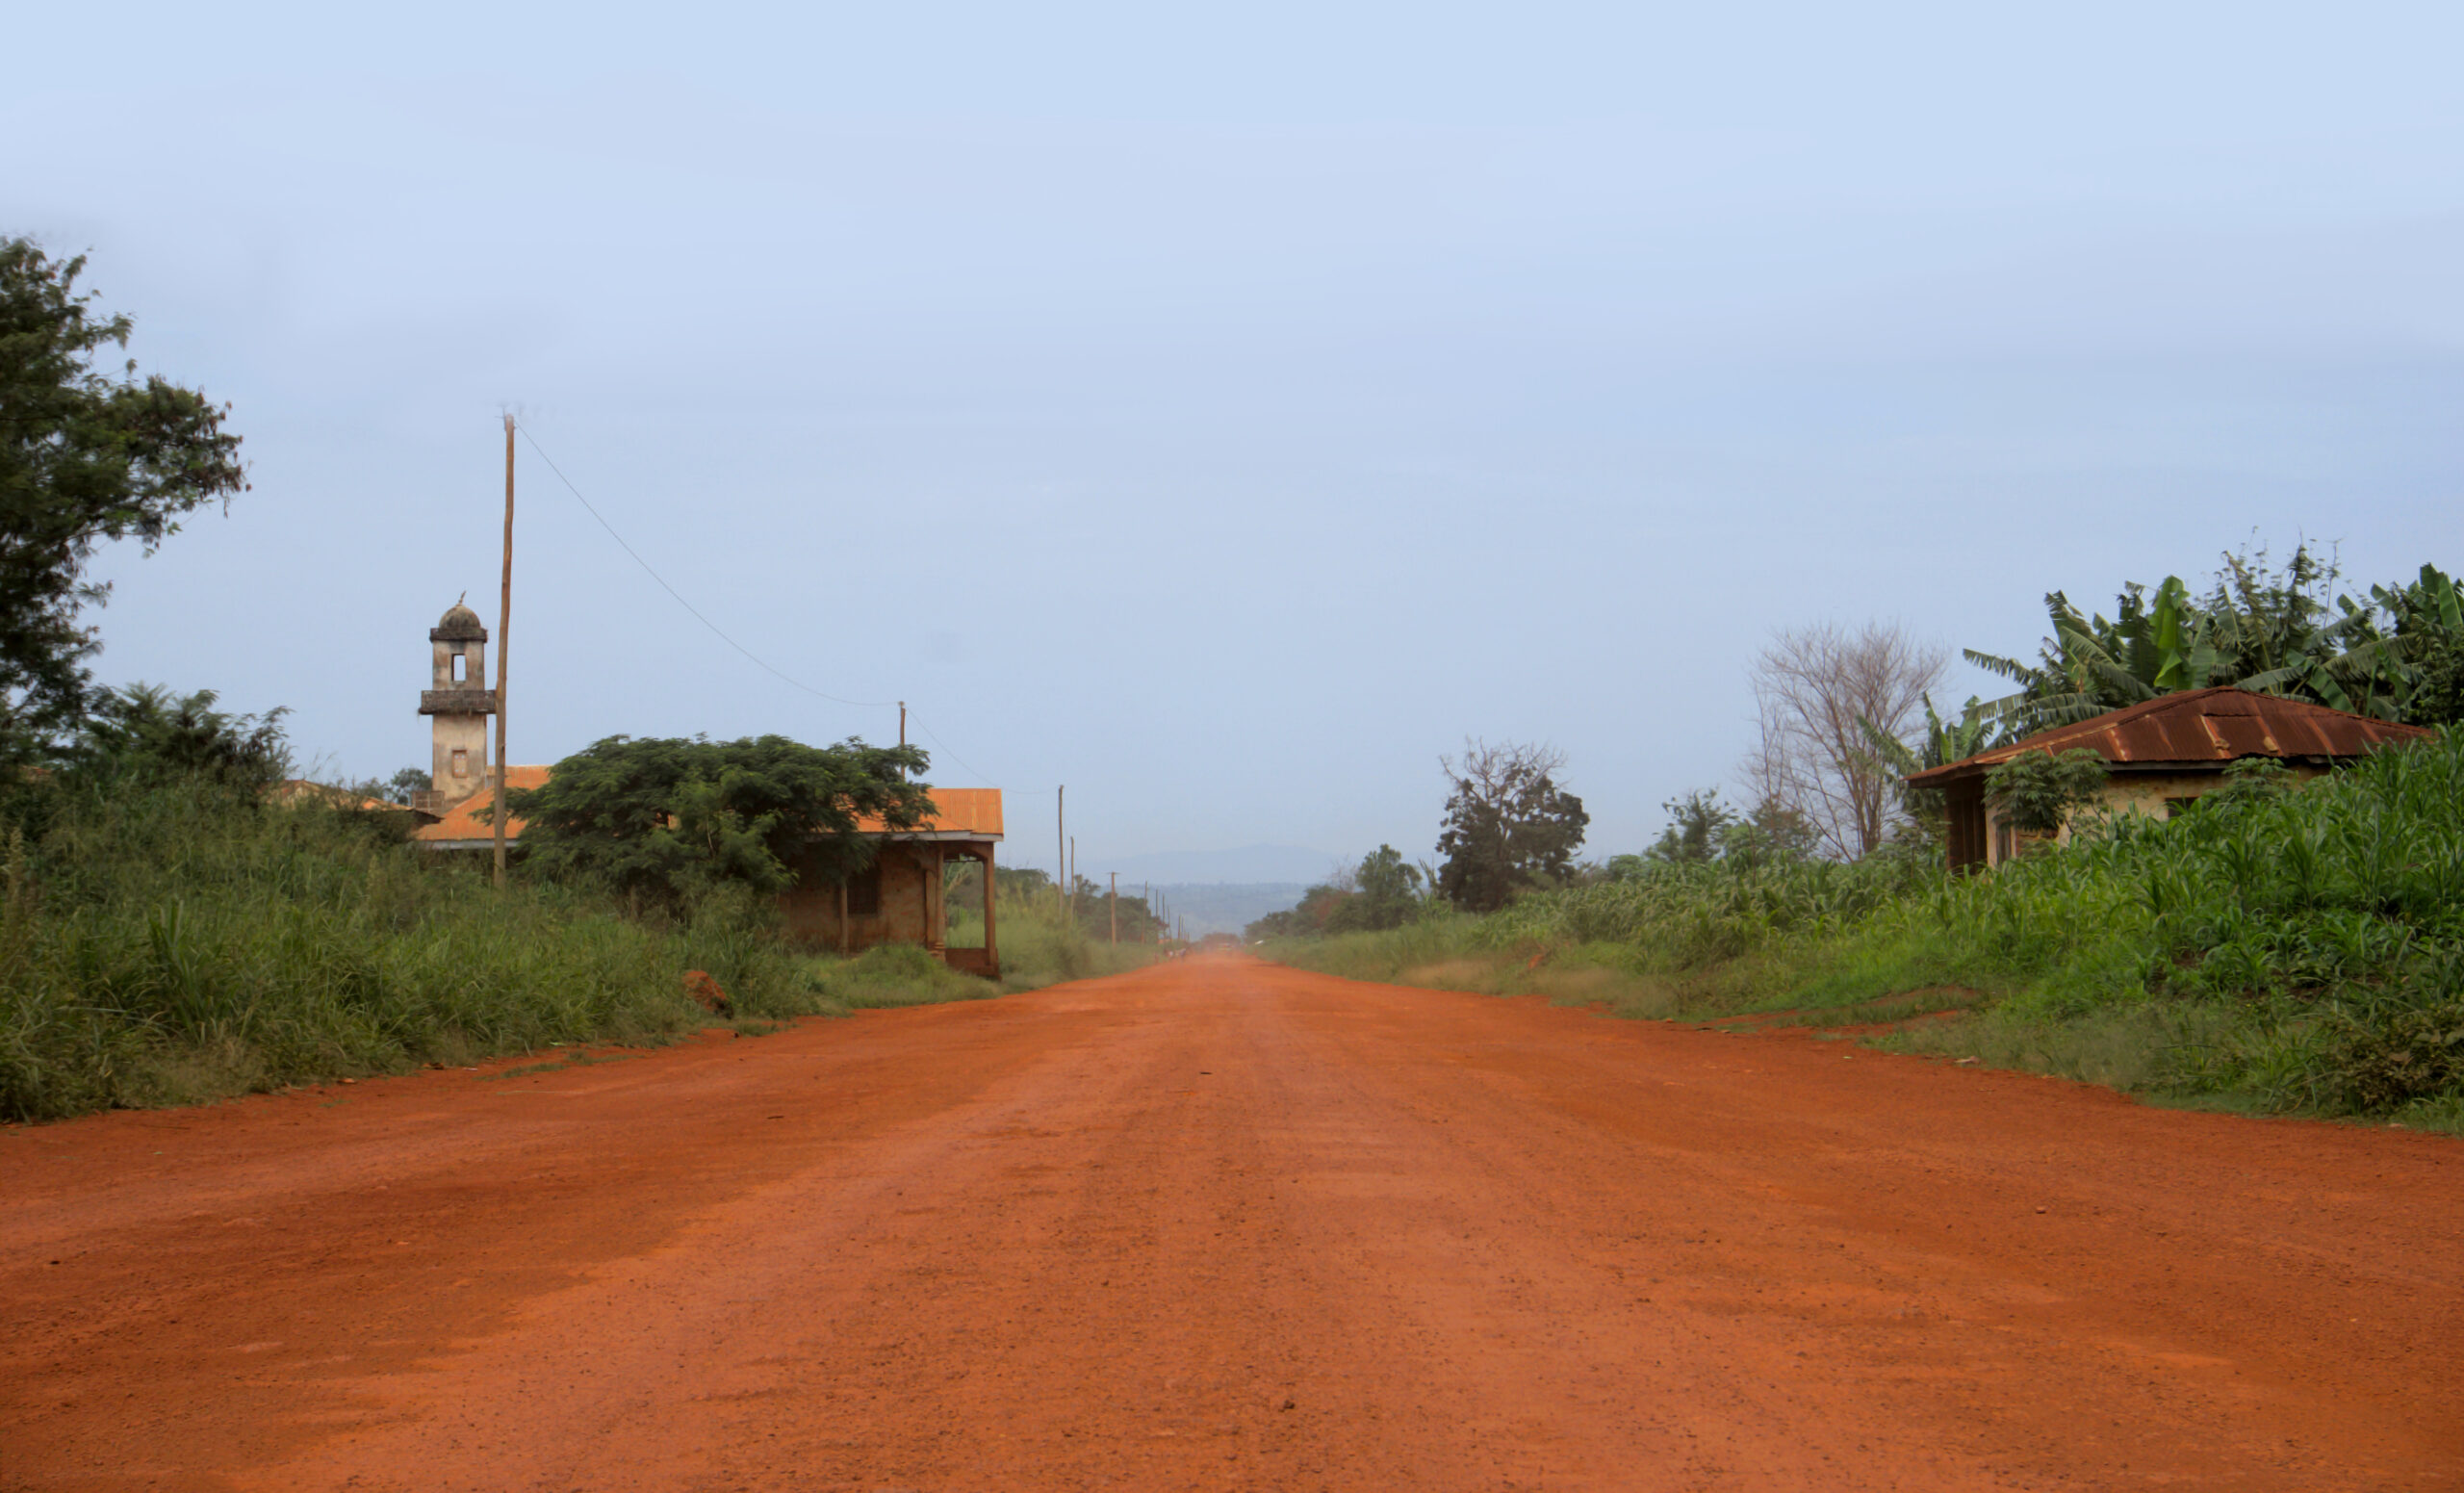 Main road in the Noun, Cameroon. It was surronded by coffee fields until the 70s. 